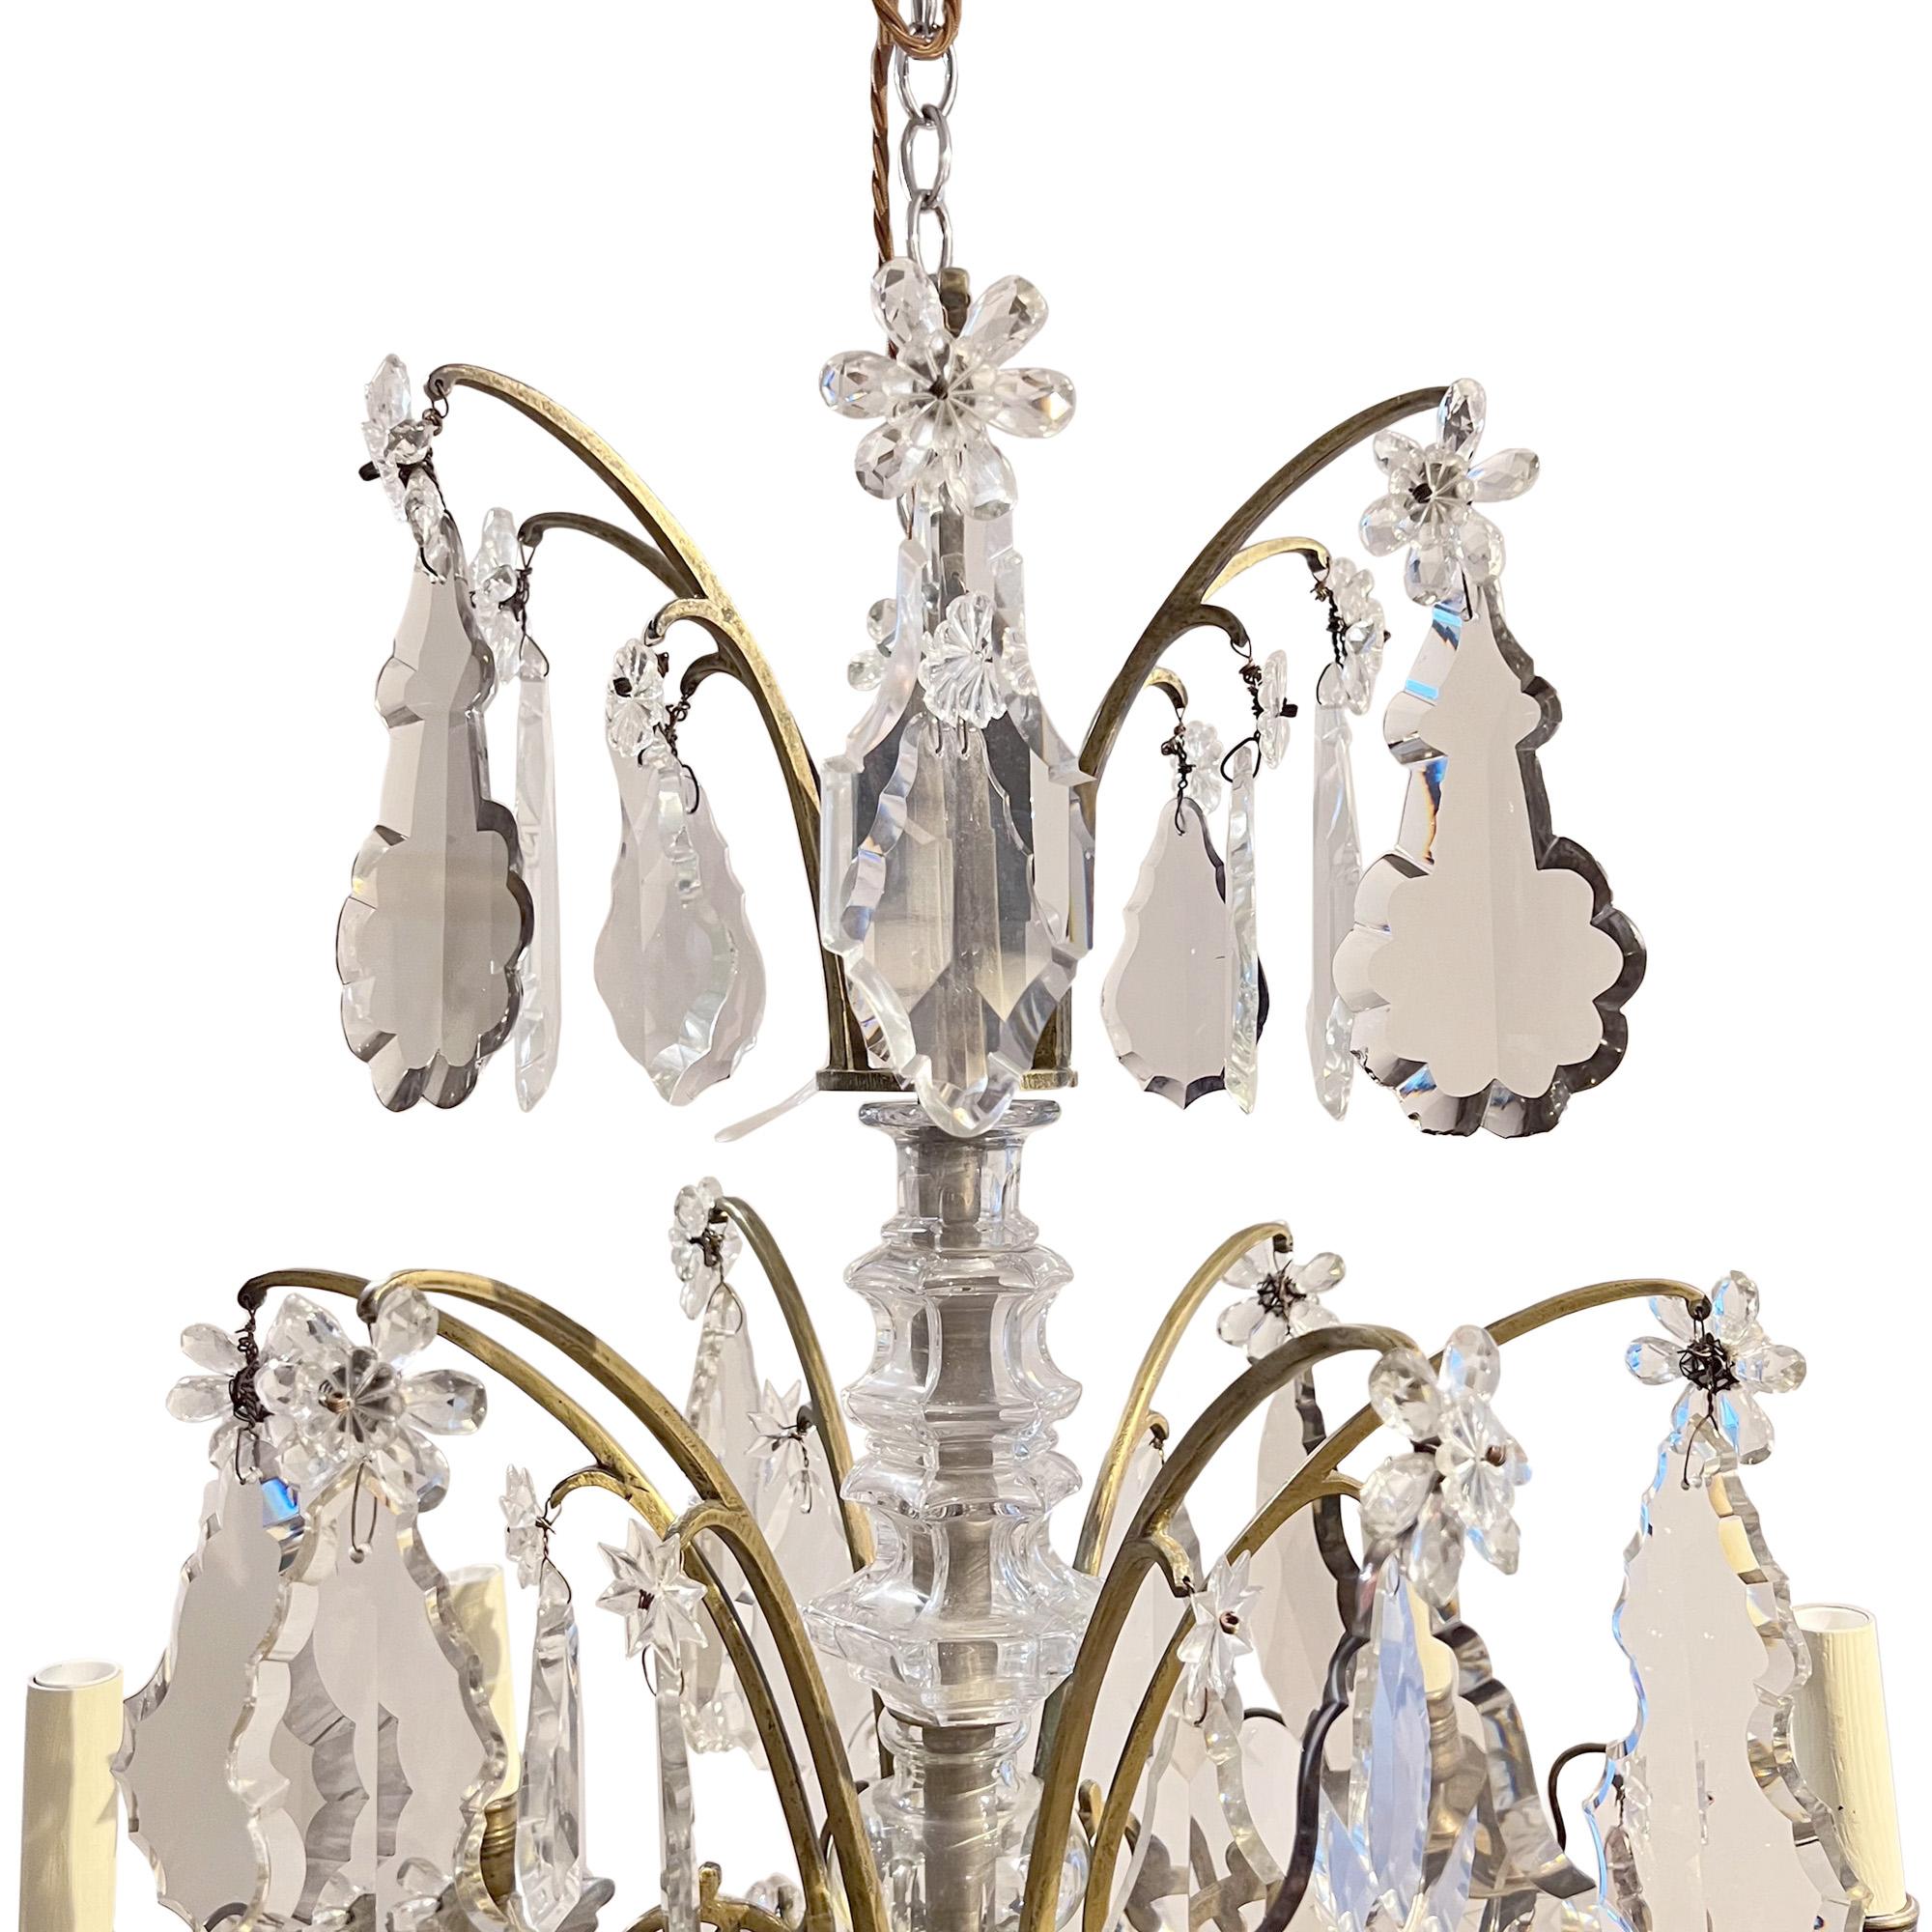 This beautiful chandelier was made in France in the 19th century.

Crafted from bronze with a mixture of clear glass and slightly tinted purple drops. All original.

Superb quality with lovely detail. Please take a look at all our pictures to see